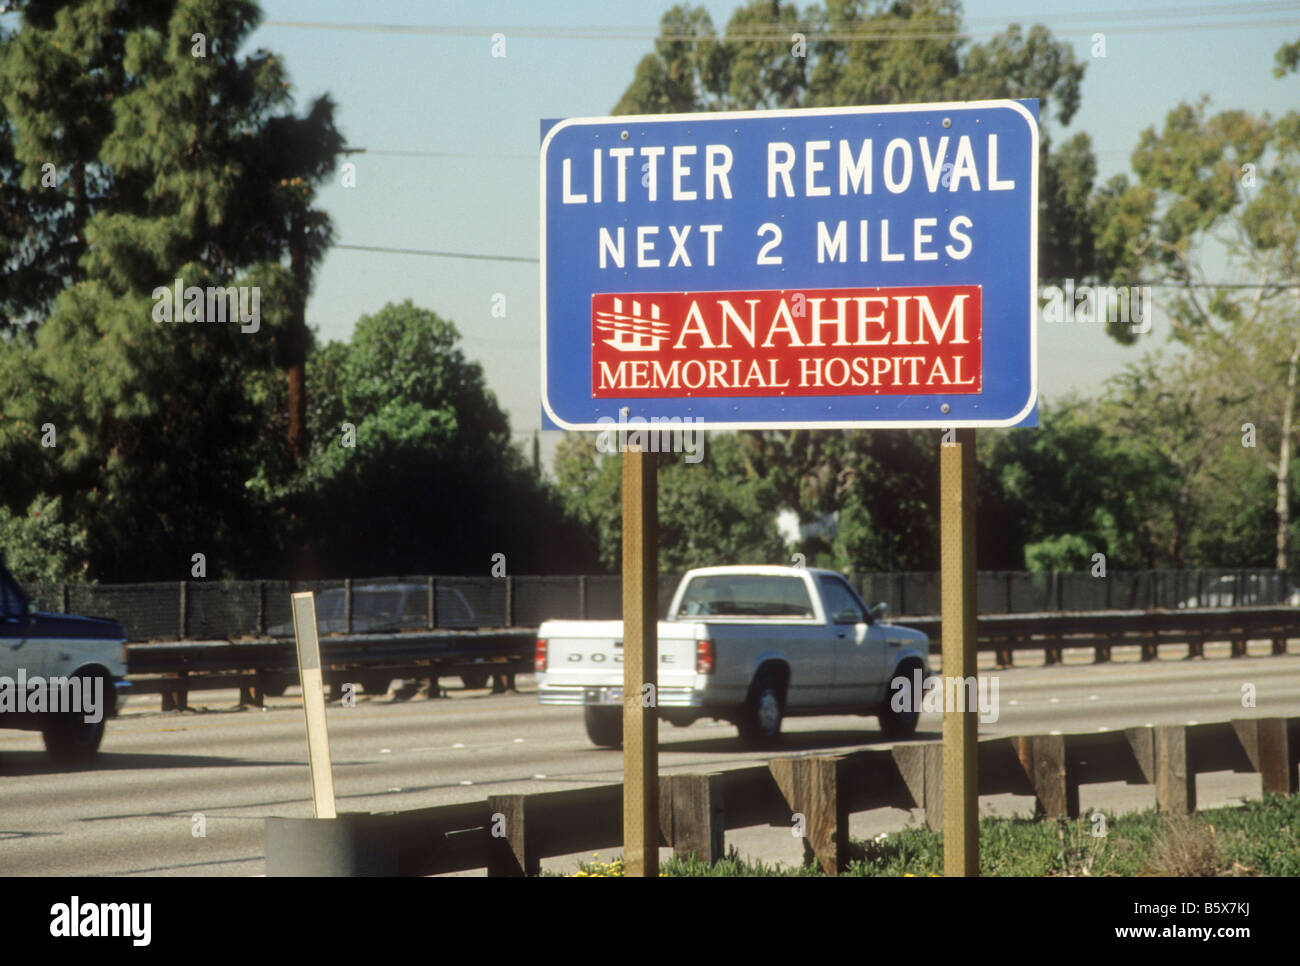 Litter removal public service sign on highway. Stock Photo